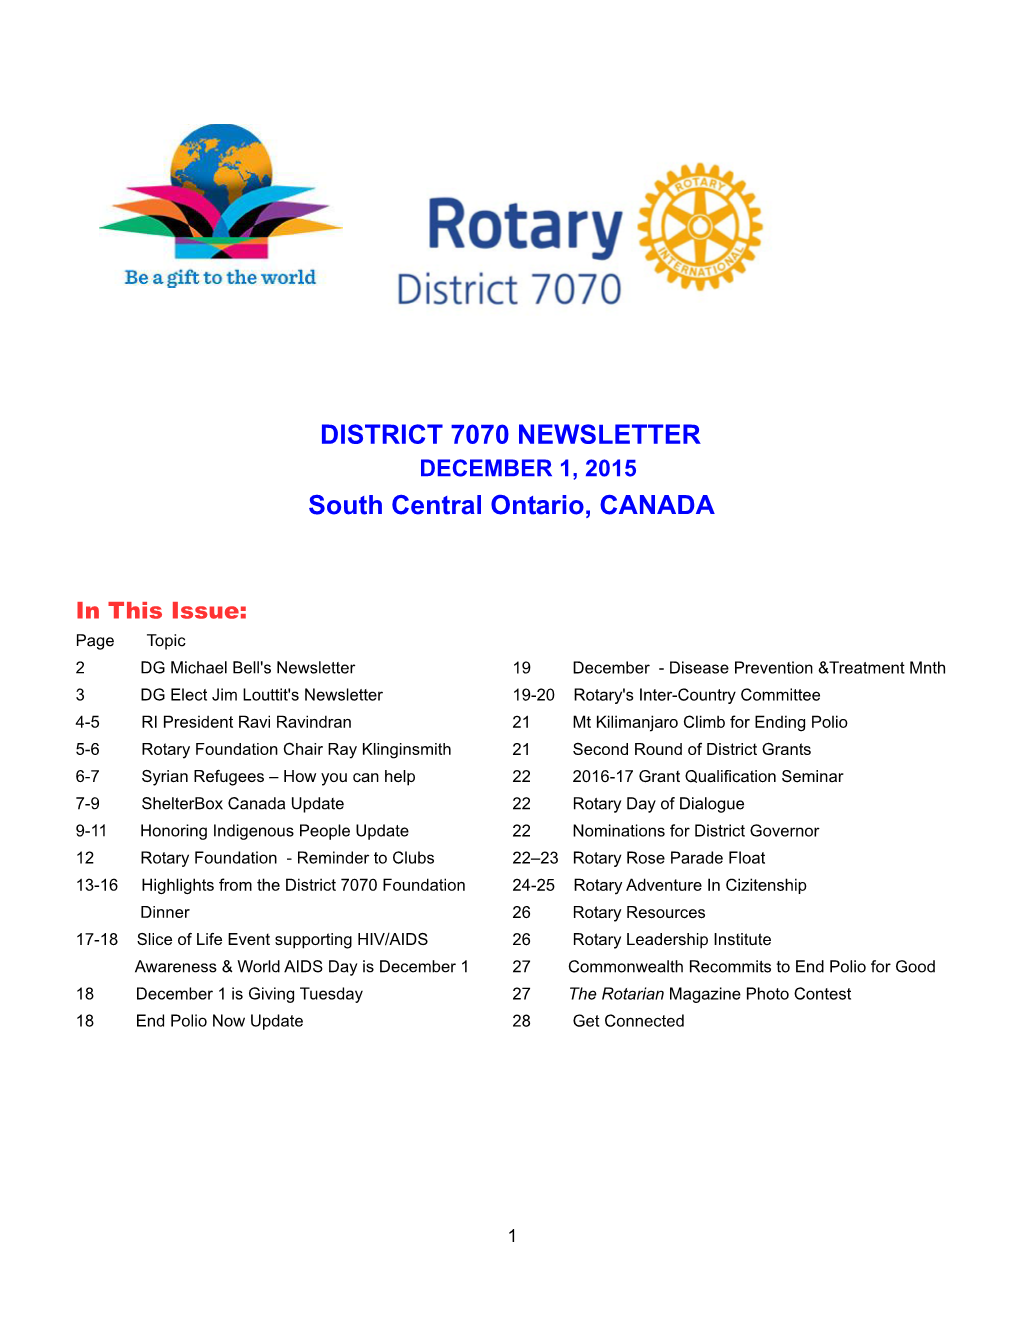 DISTRICT 7070 NEWSLETTER South Central Ontario, CANADA